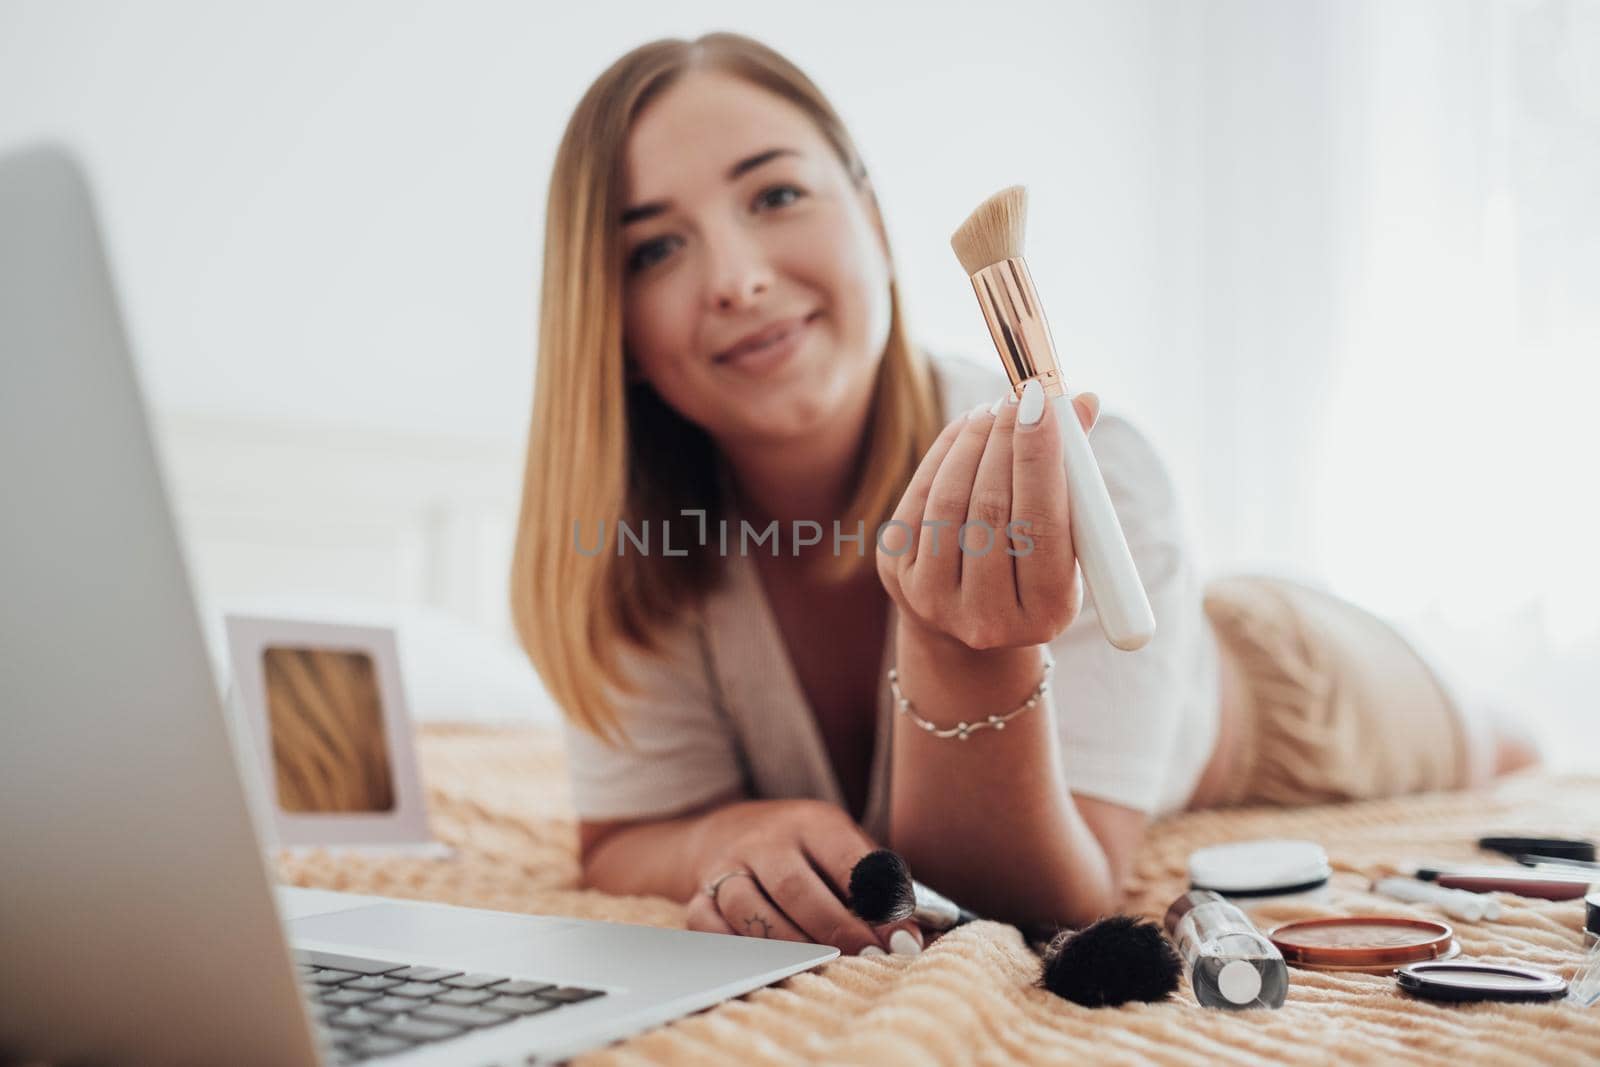 Makeup Brush in Focus, Young Woman Laying on Bed with Cosmetics and Looking Into Camera During Her Online Master Class Through Laptop